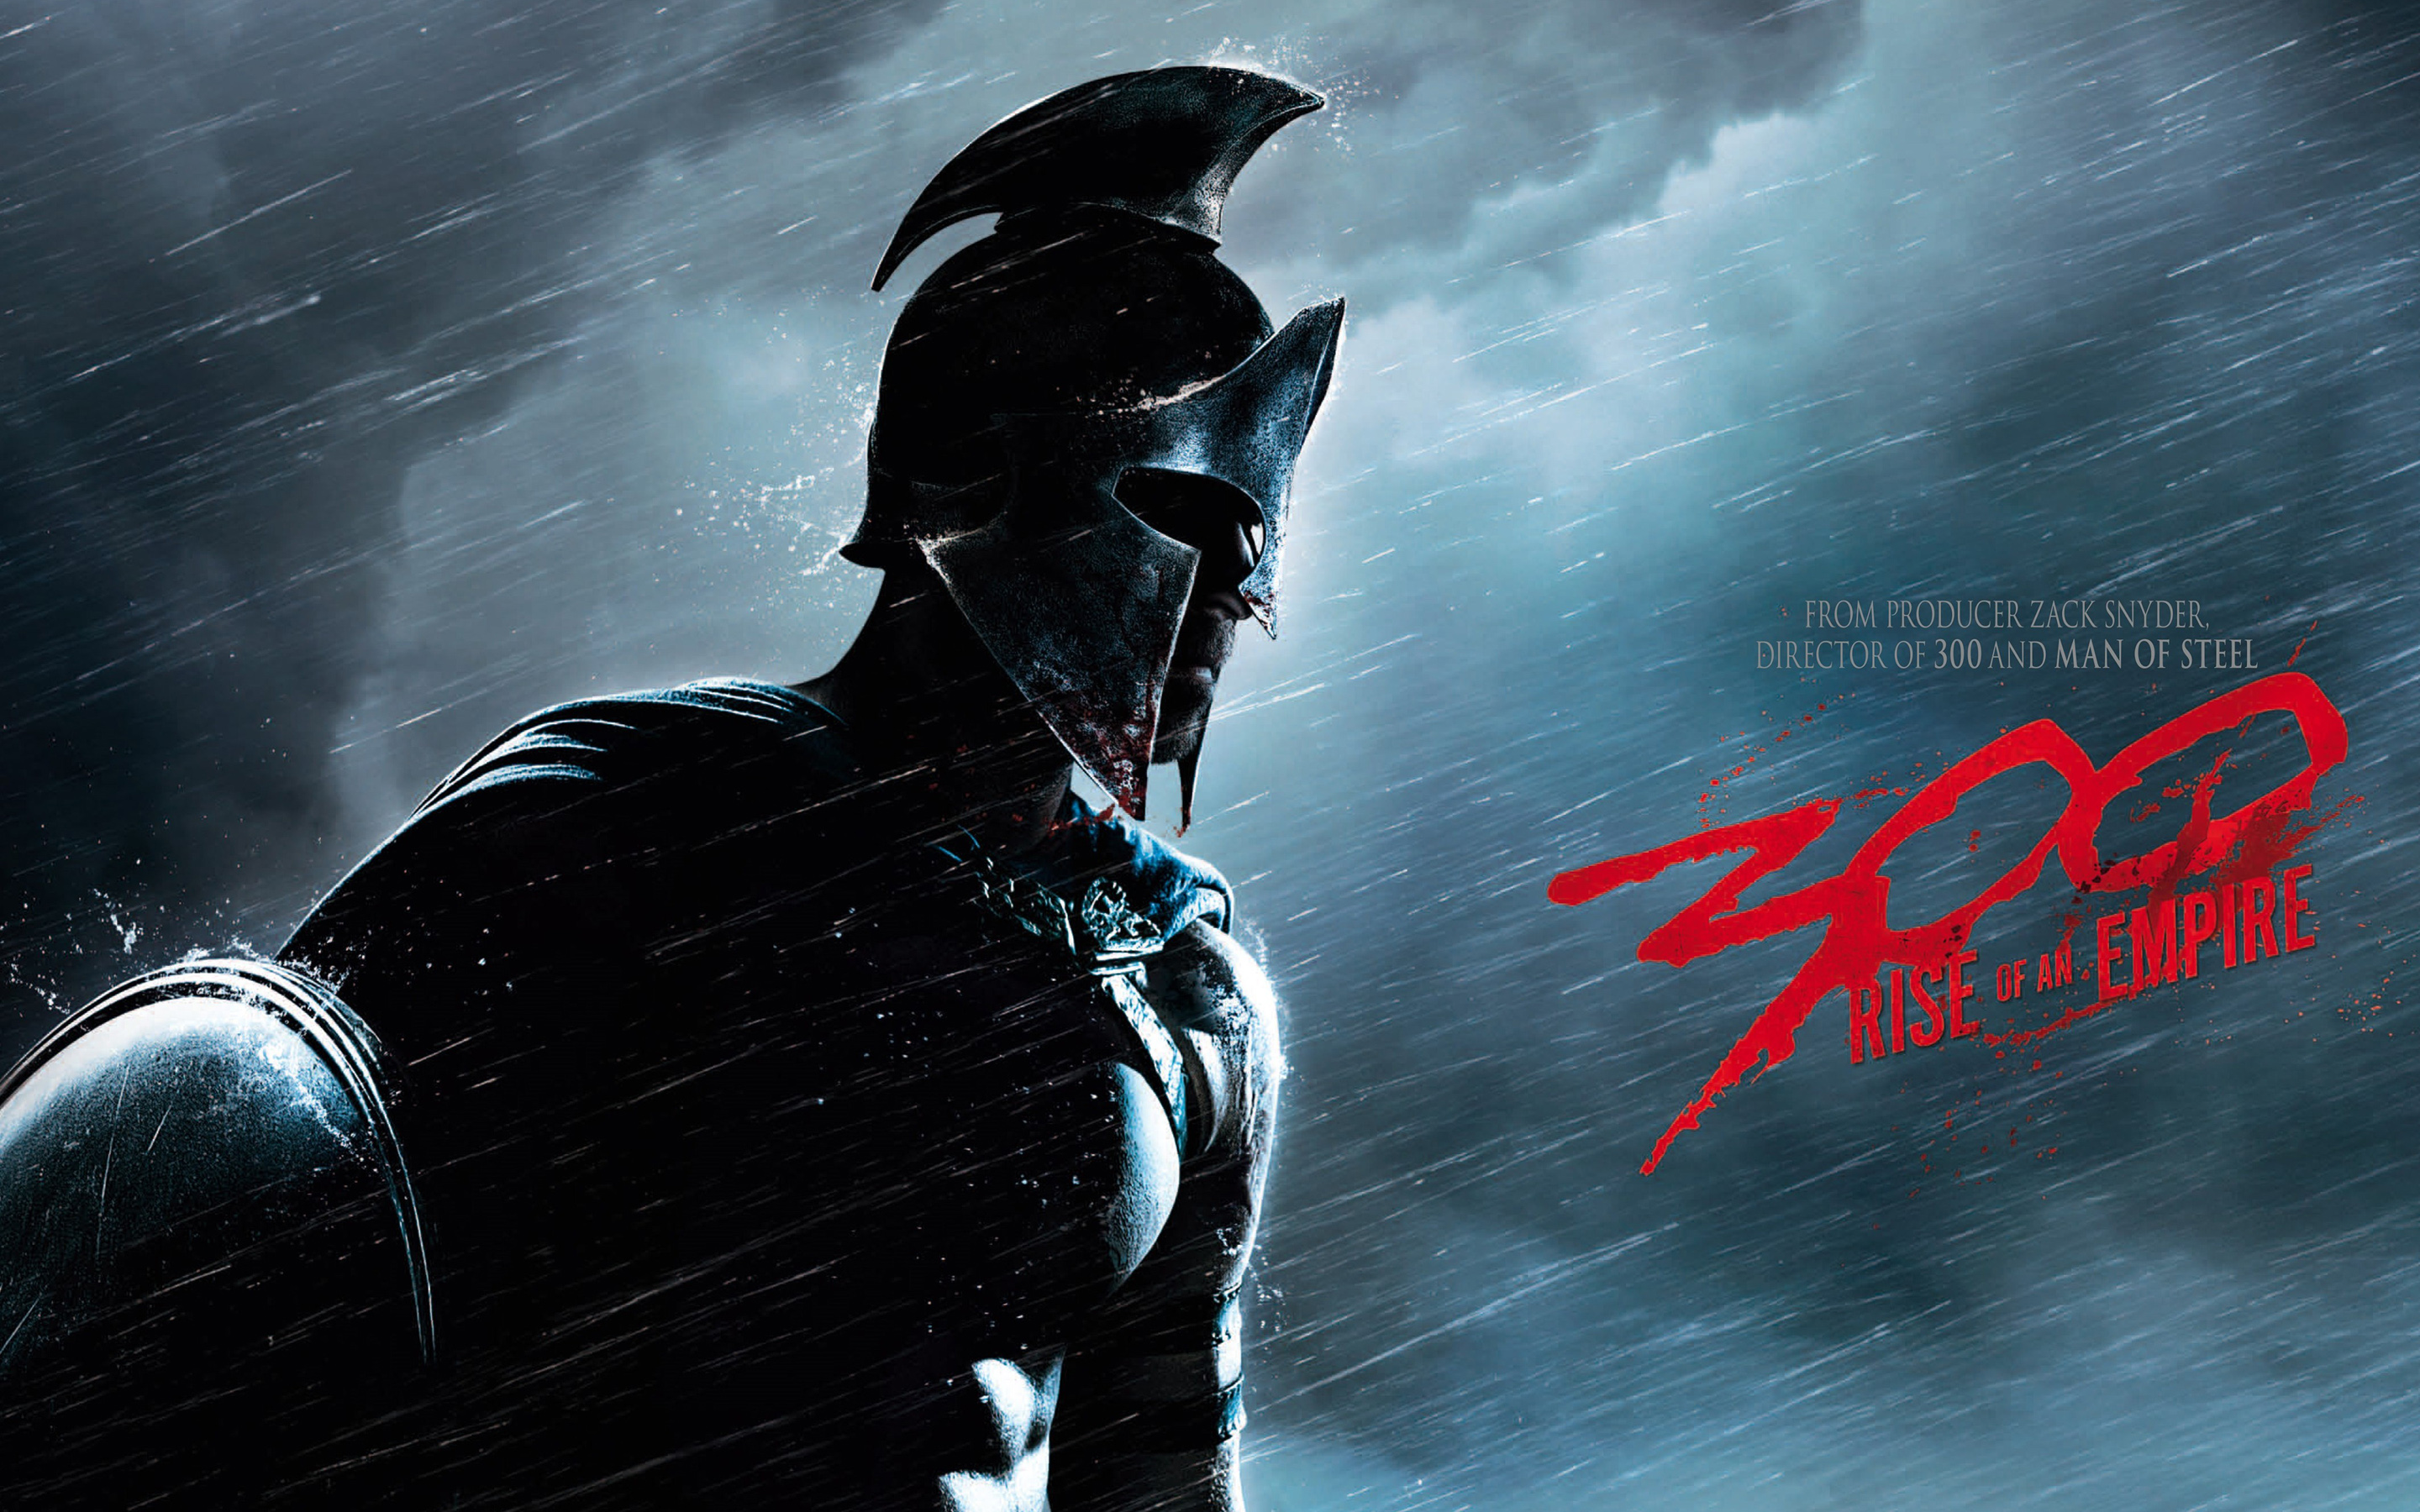  Rise of an Empire Movie Wallpapers HD Wallpapers